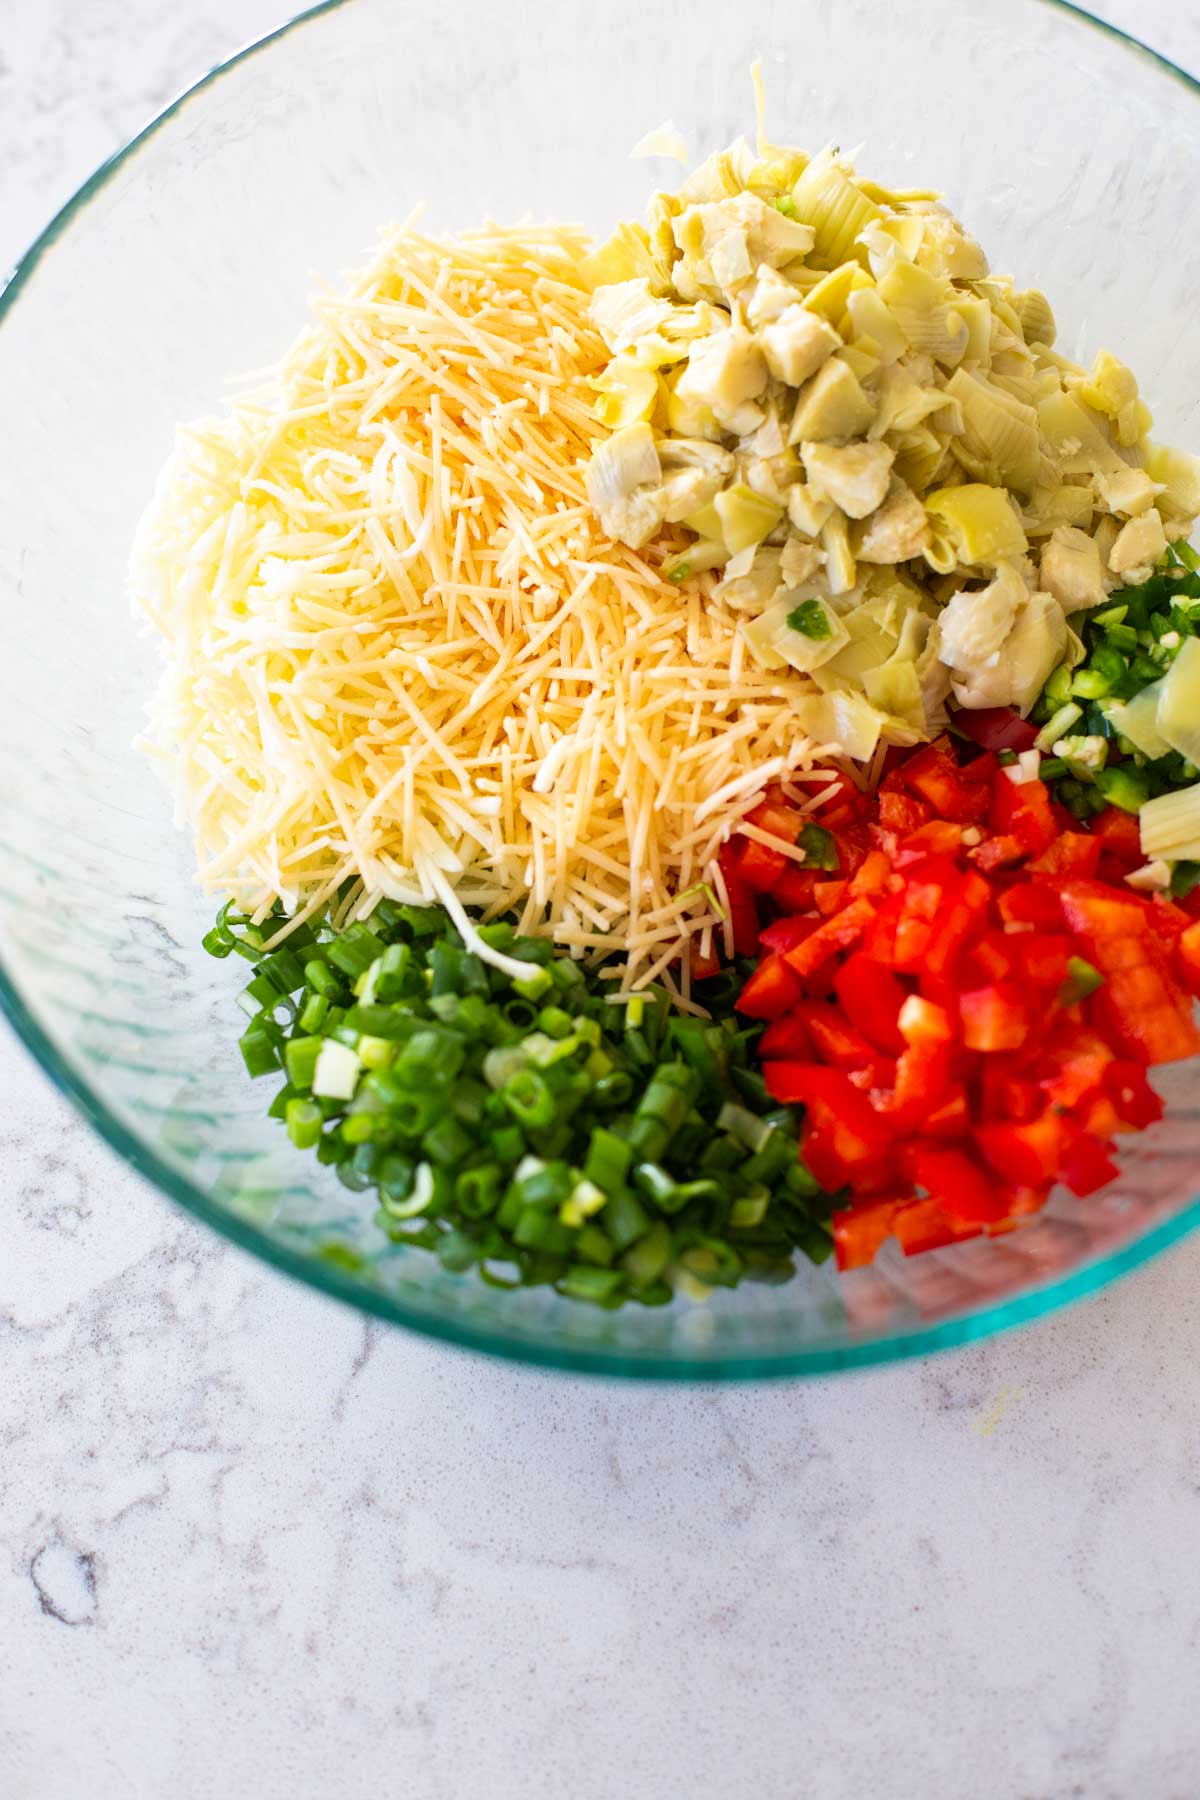 The minced jalapeño, artichoke hearts, and veggies are added to a bowl with shredded cheese.